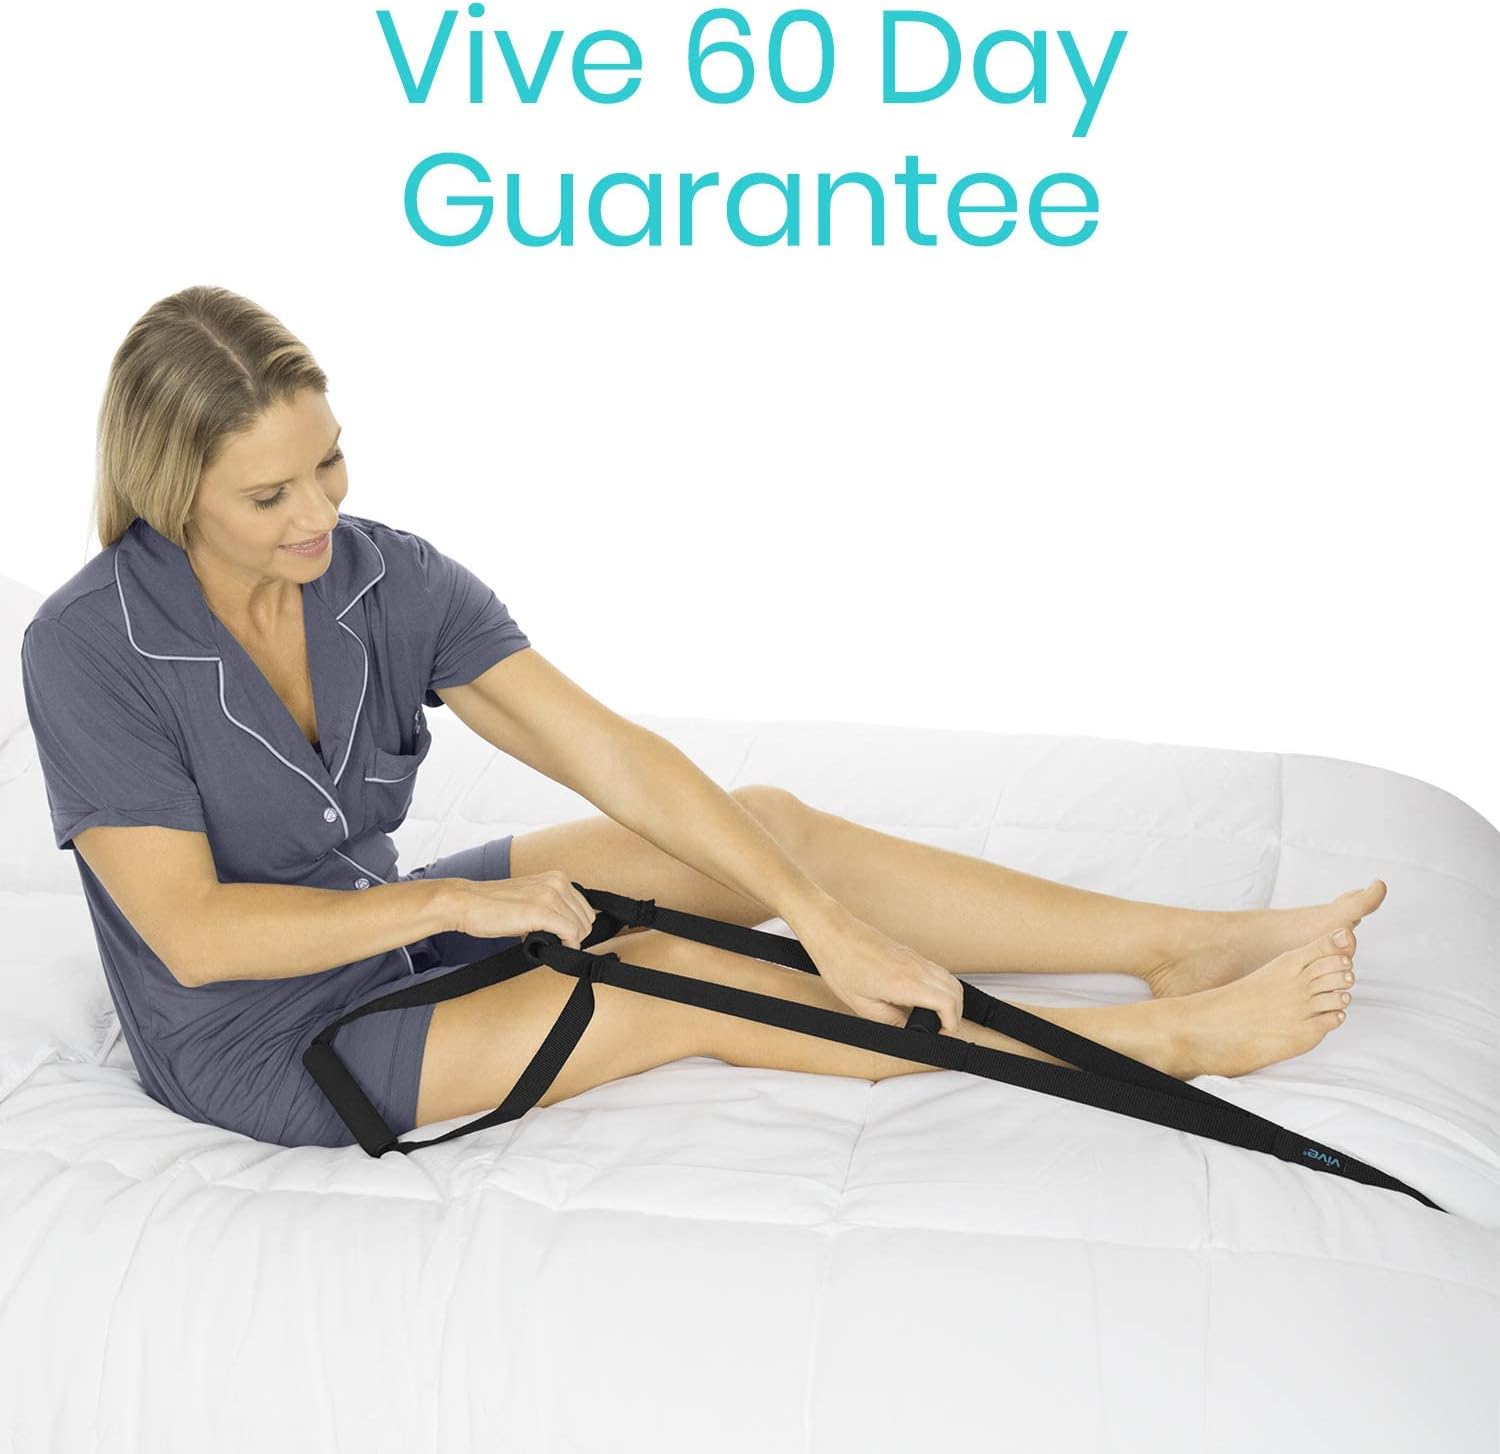 Vive Bed Ladder Assist - Pull Up Assist Device with Handle Strap - Rope Ladder Caddie Helper - Sitting, Sit Up Hoist for Elderly, Senior, Injury Recovery Patient, Pregnant, Handicap - Padded Hand Grip